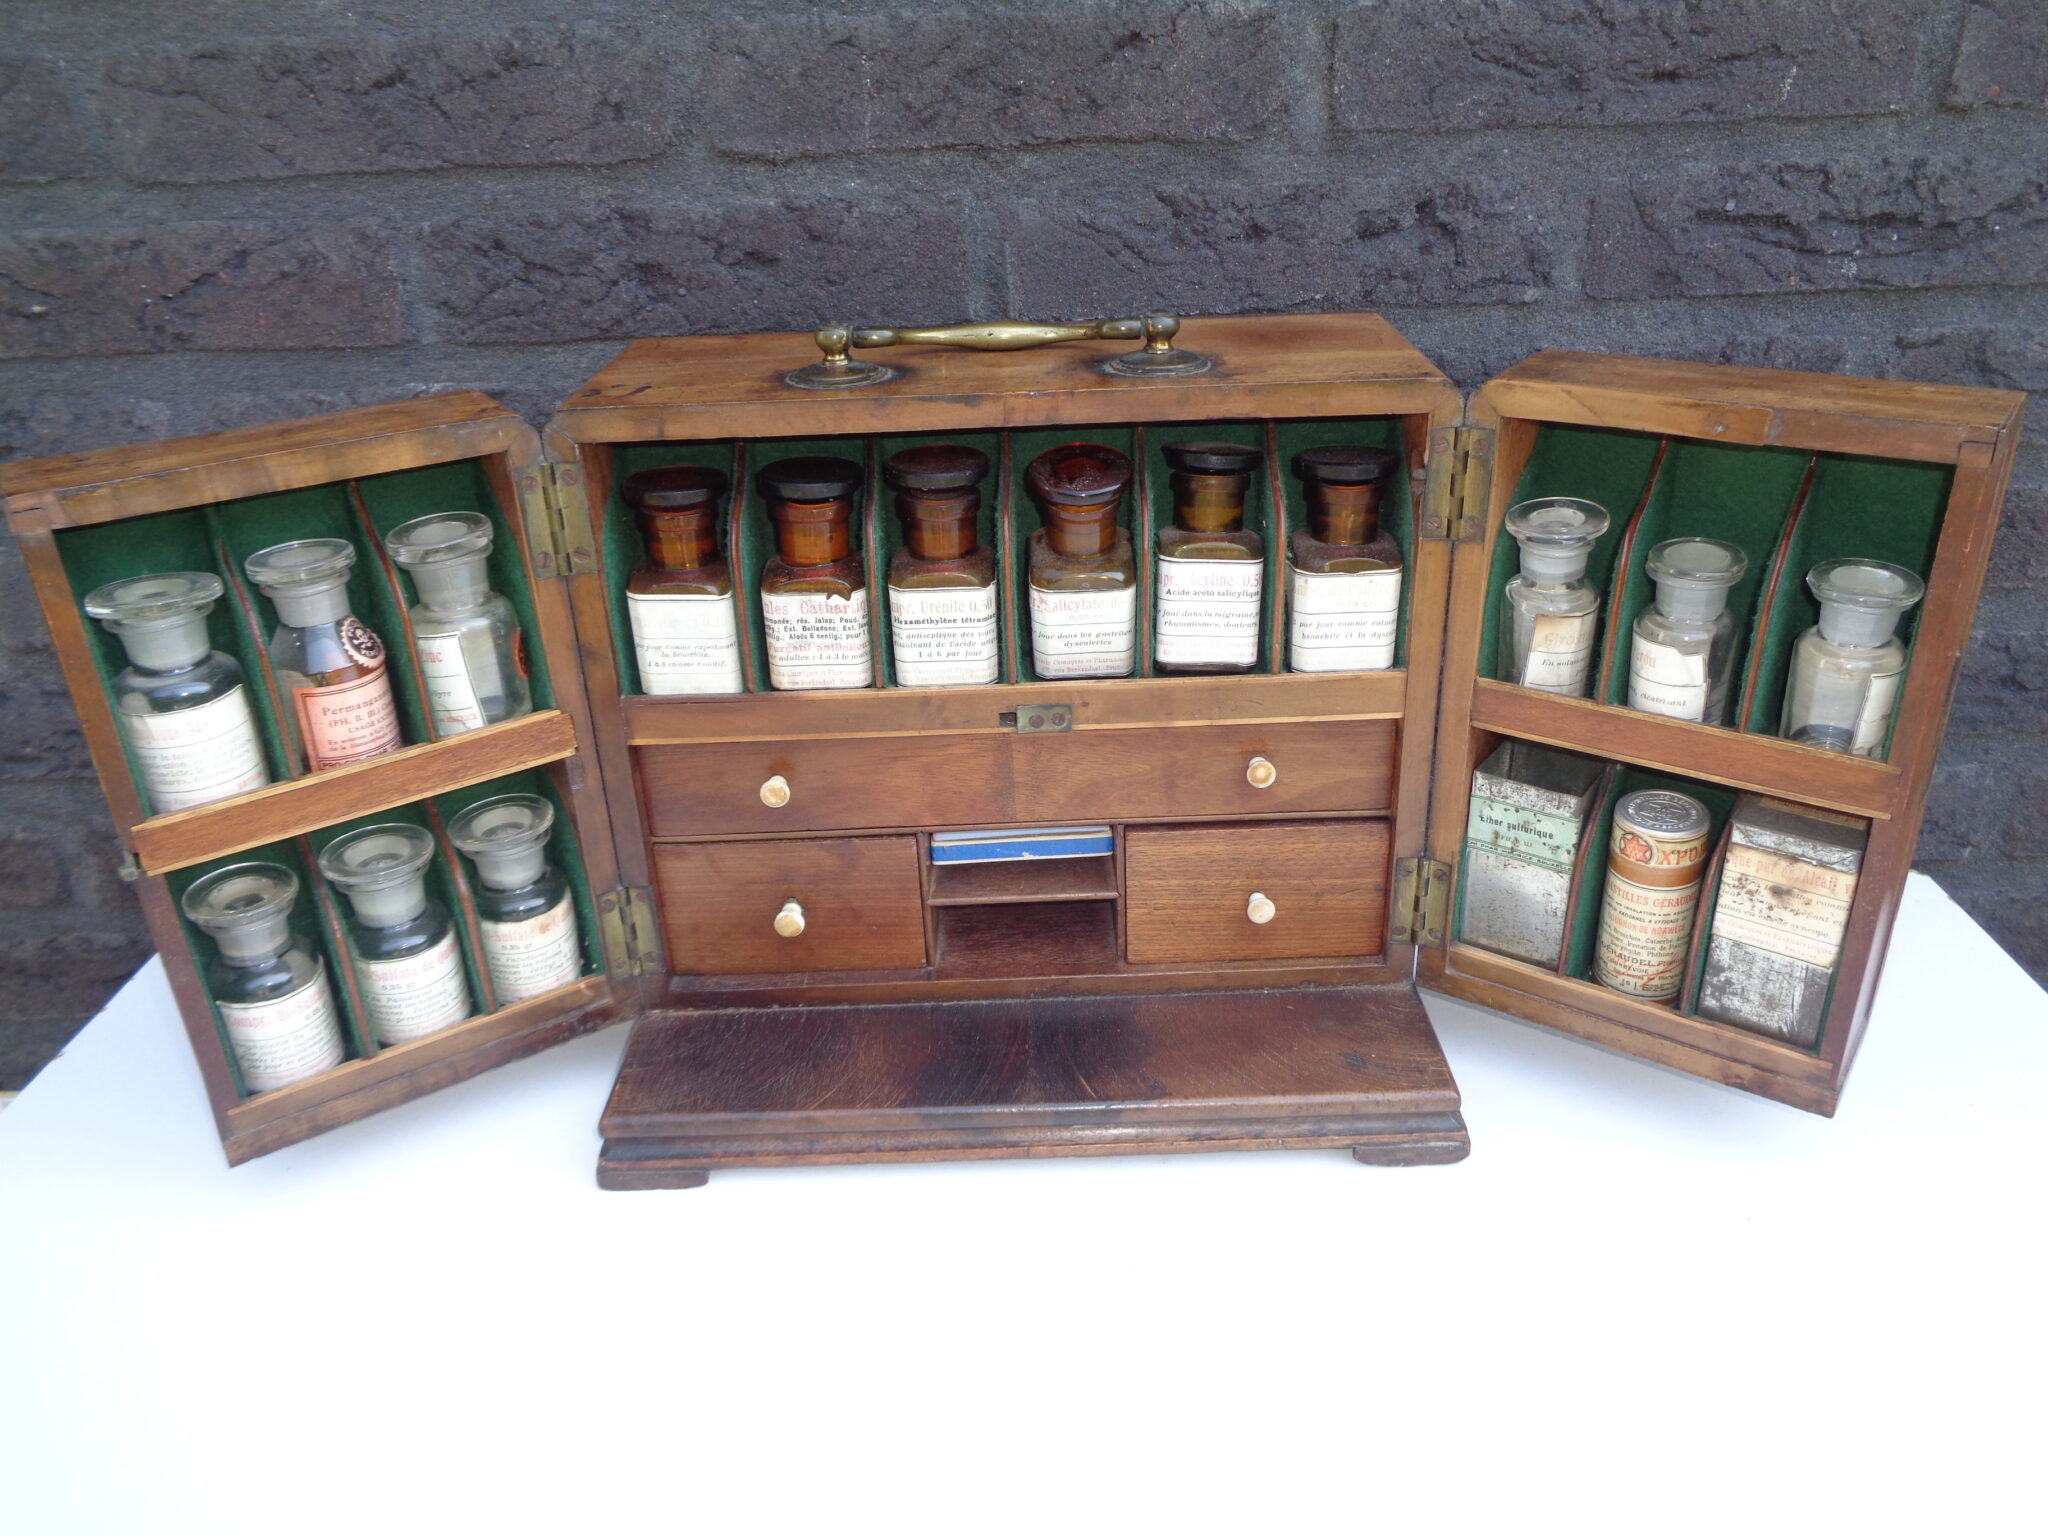 Victorian apothecary or medicine chest